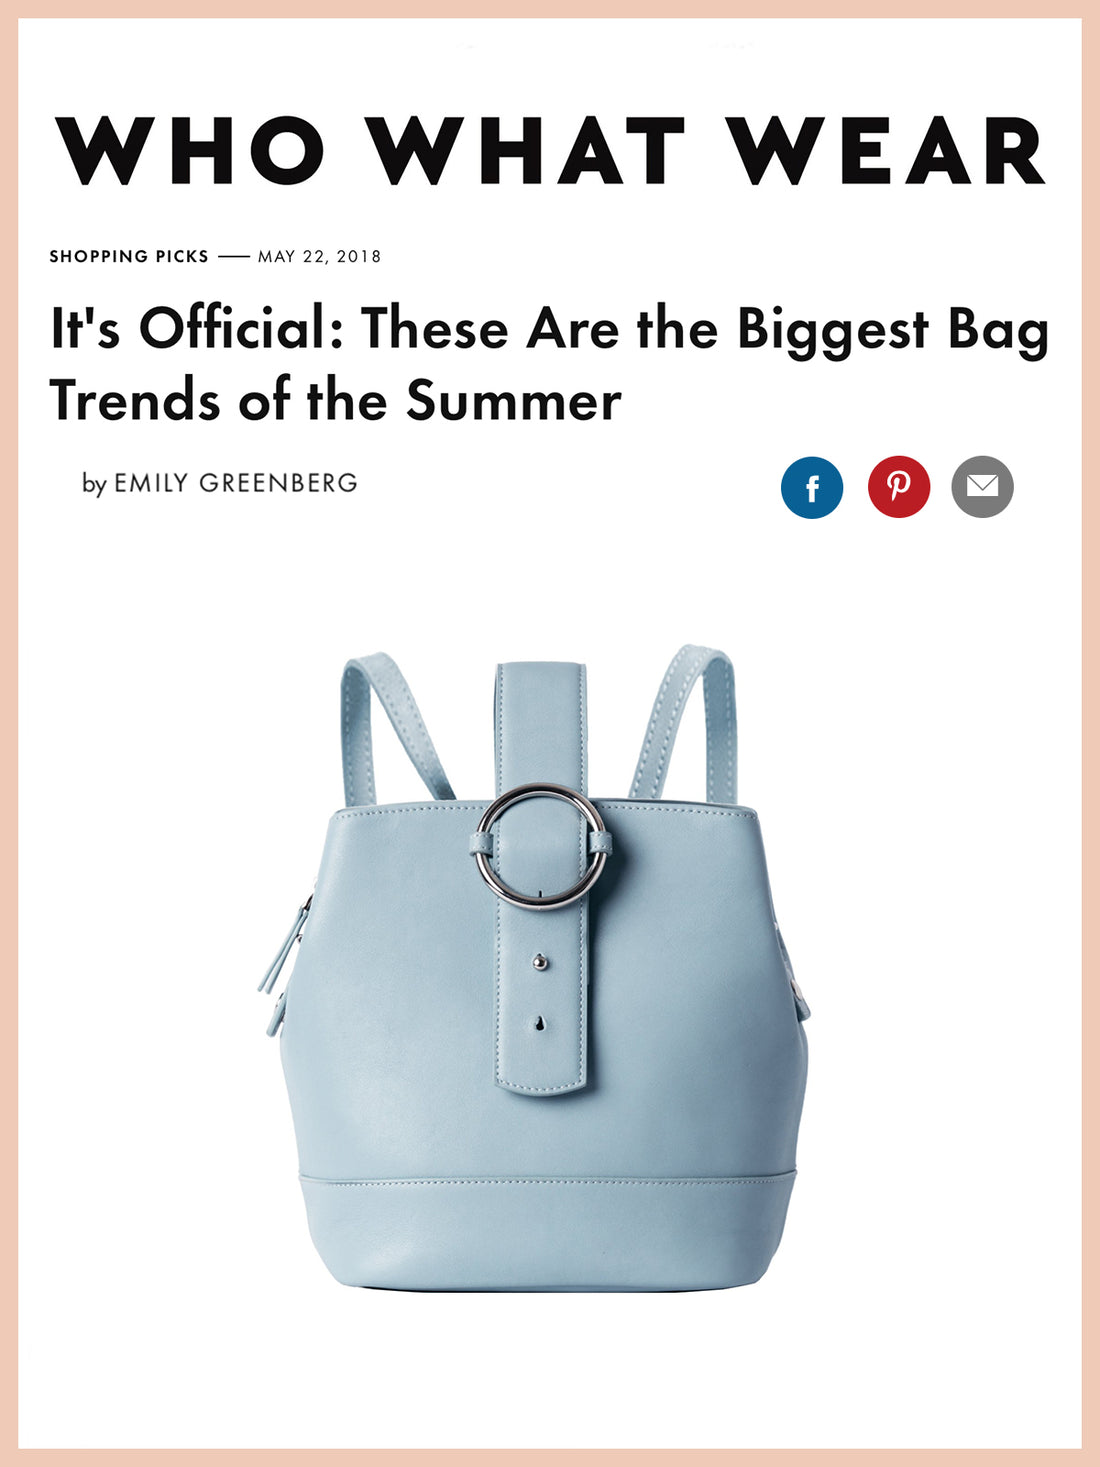 WHO WHAT WEAR, It's Official: These Are the Biggest Bag Trends of the Summer